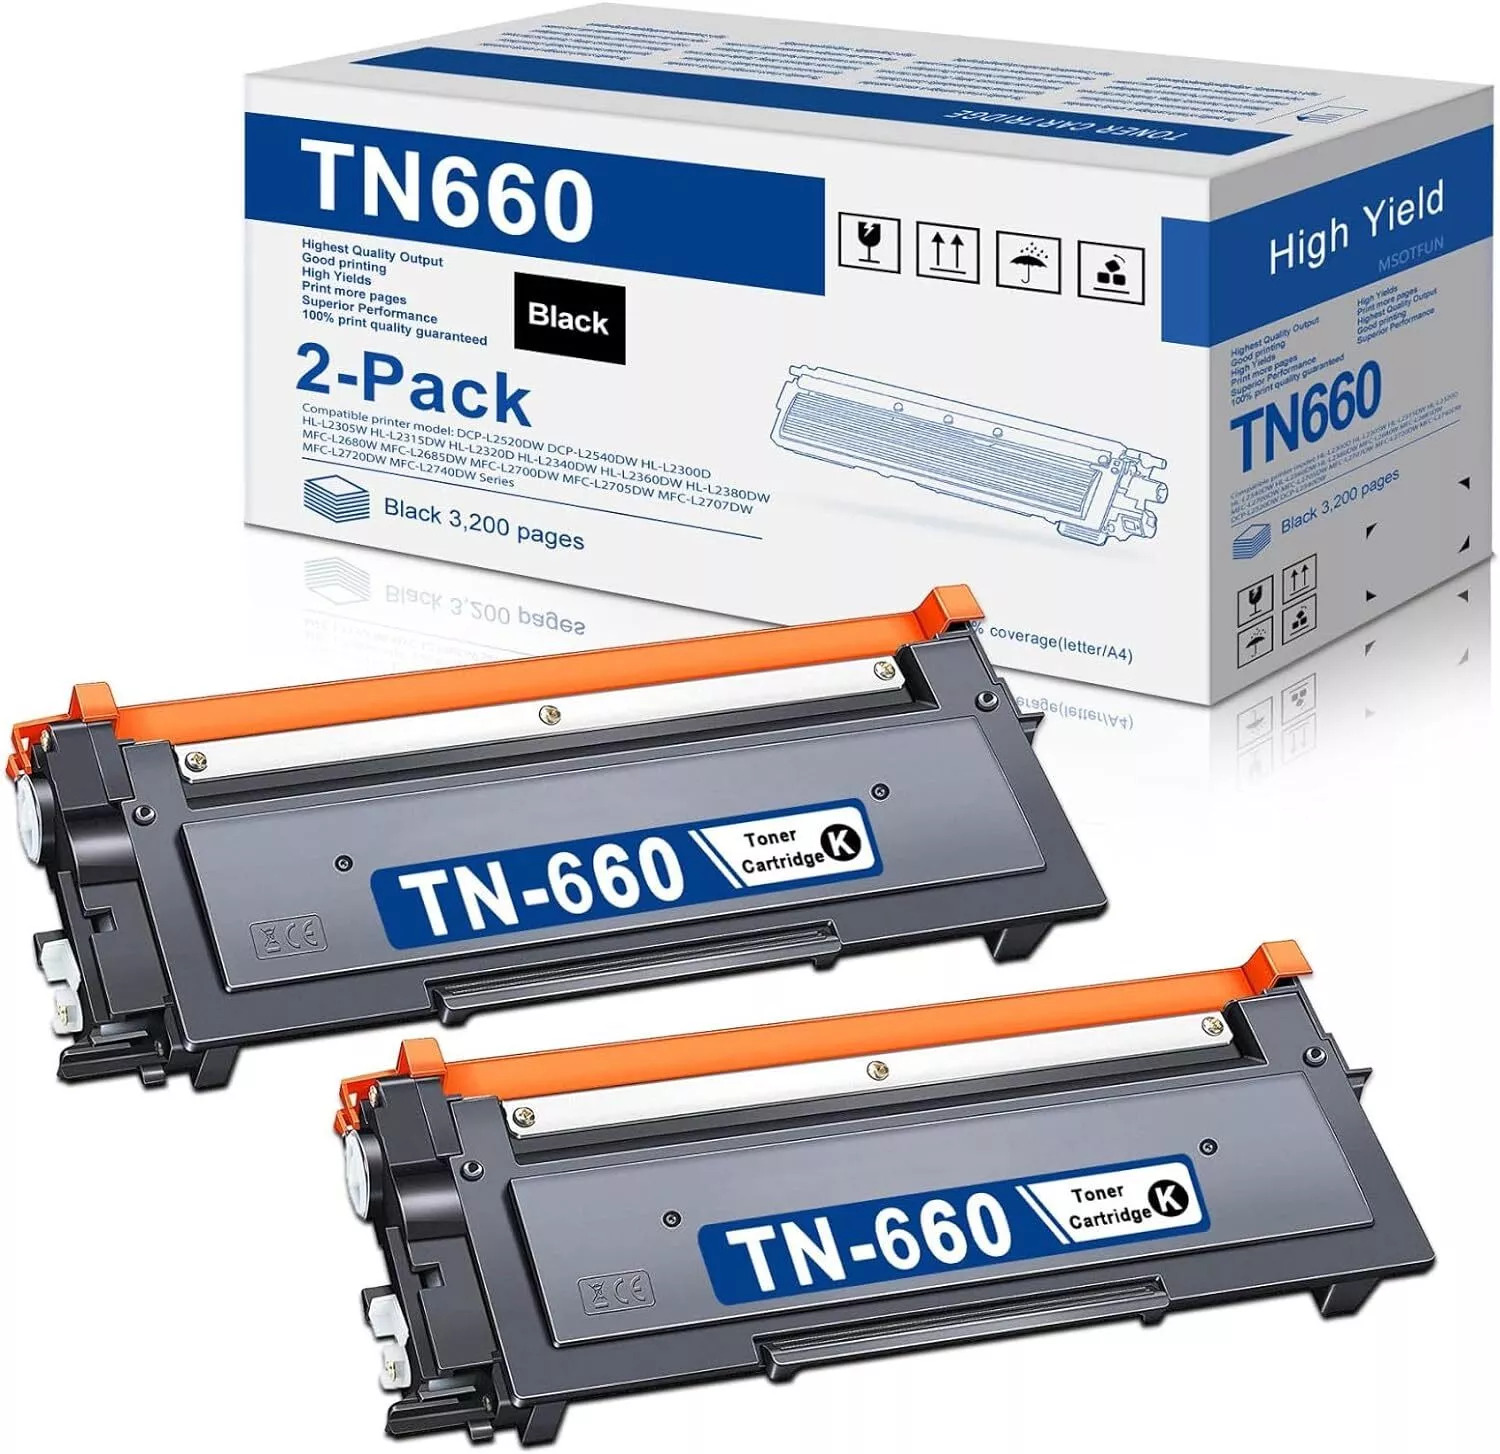 TN660 2BK High Yield Toner Cartridge Replacement for Brother DCP-L2540DW Printer